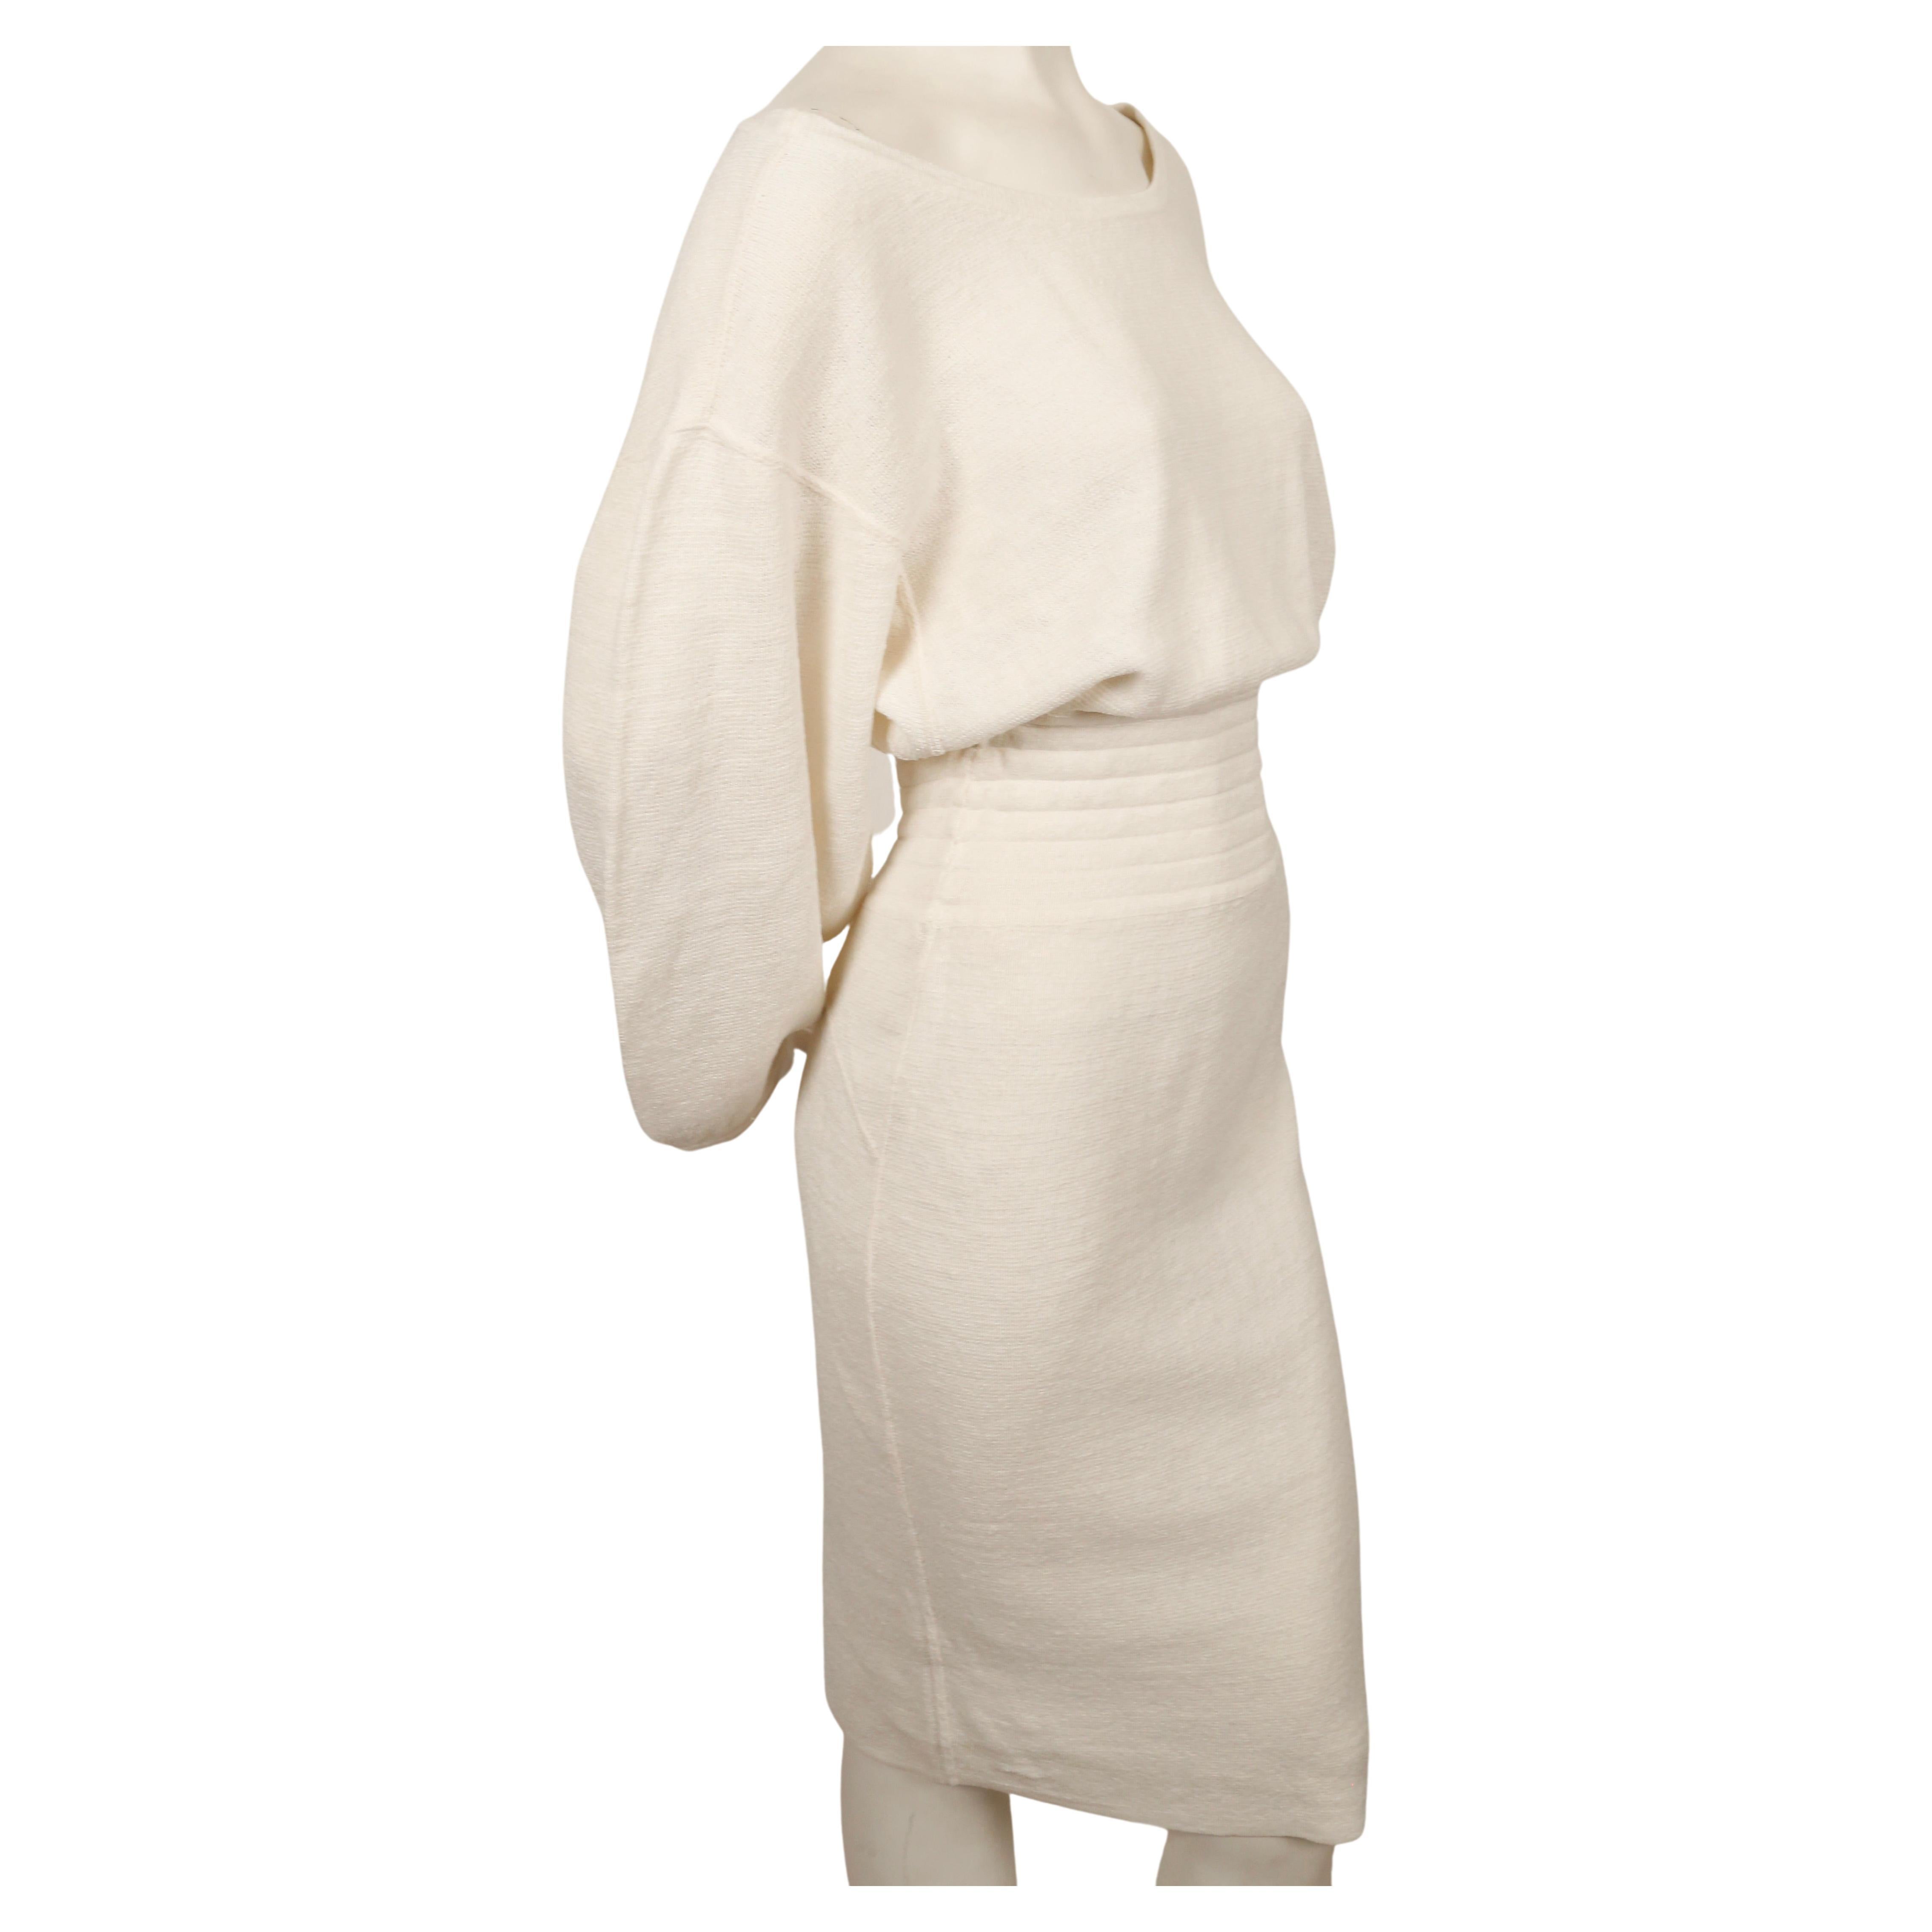 1985 AZZEDINE ALAIA linen knit dress with cut out back For Sale 1